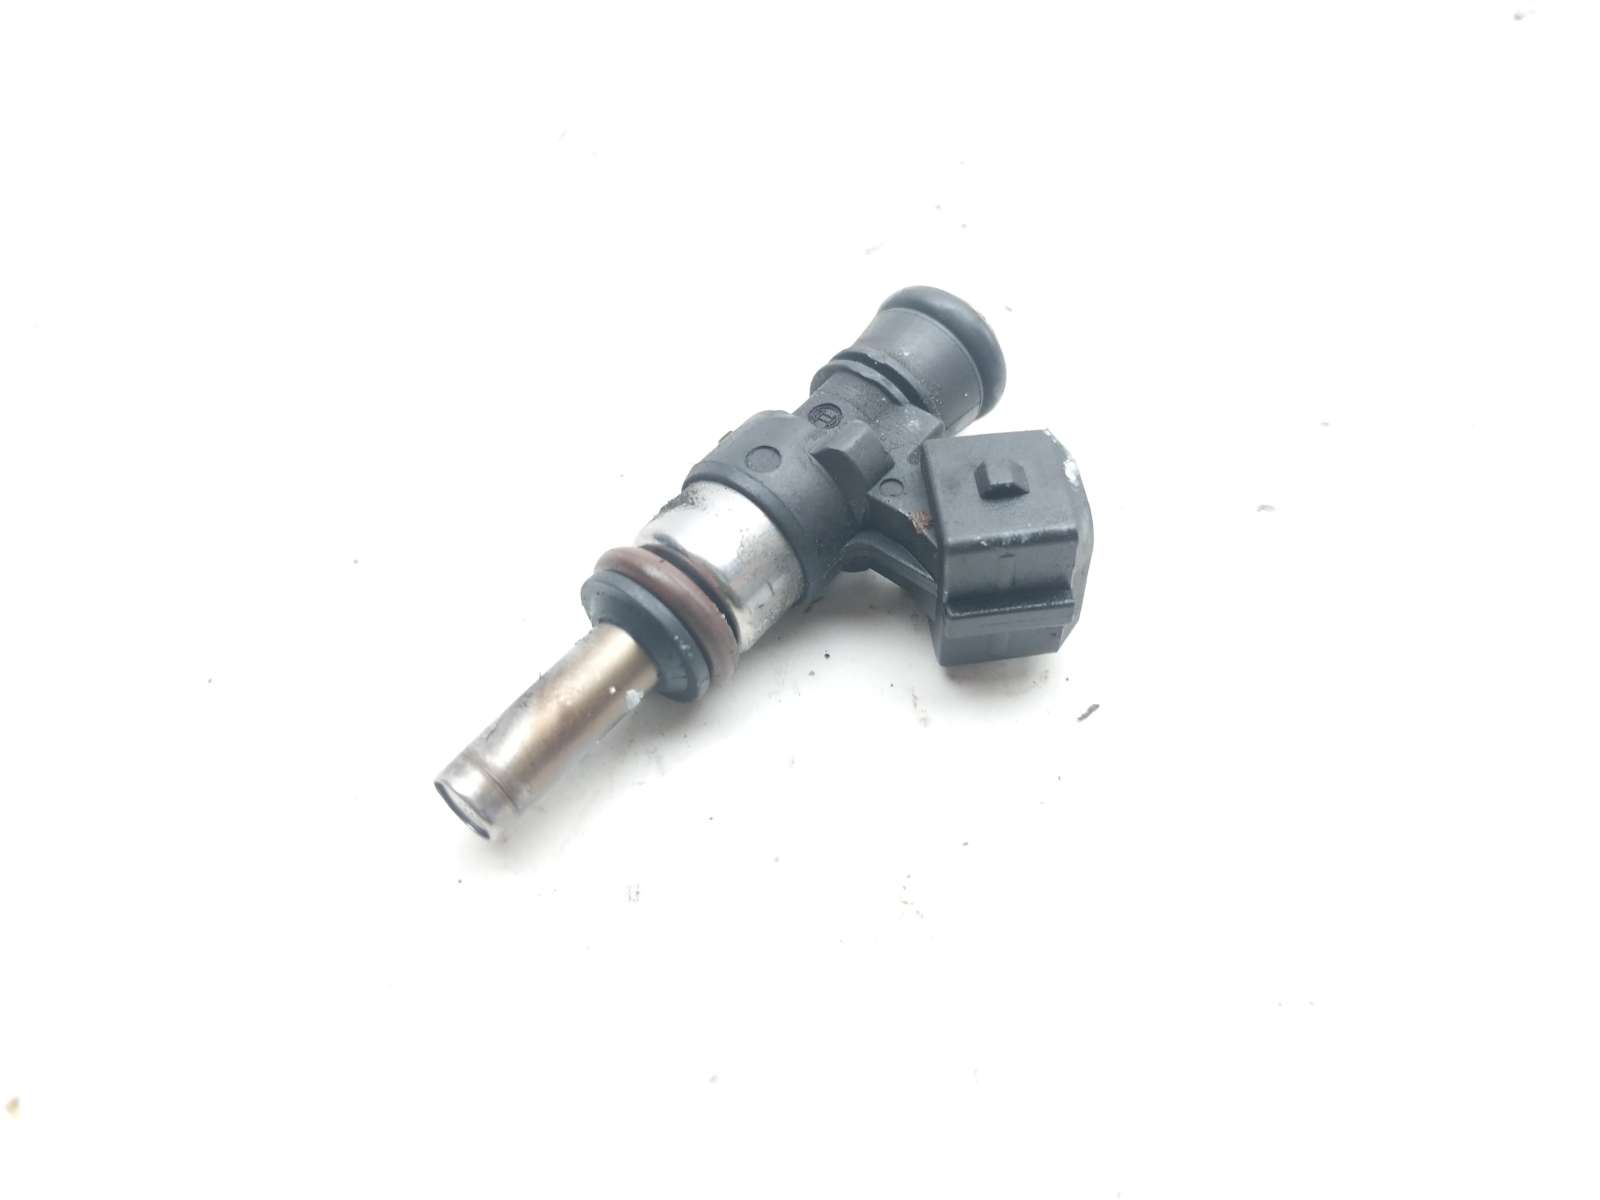 12 BMW R 1200 RT Gas Fuel Injector (A)